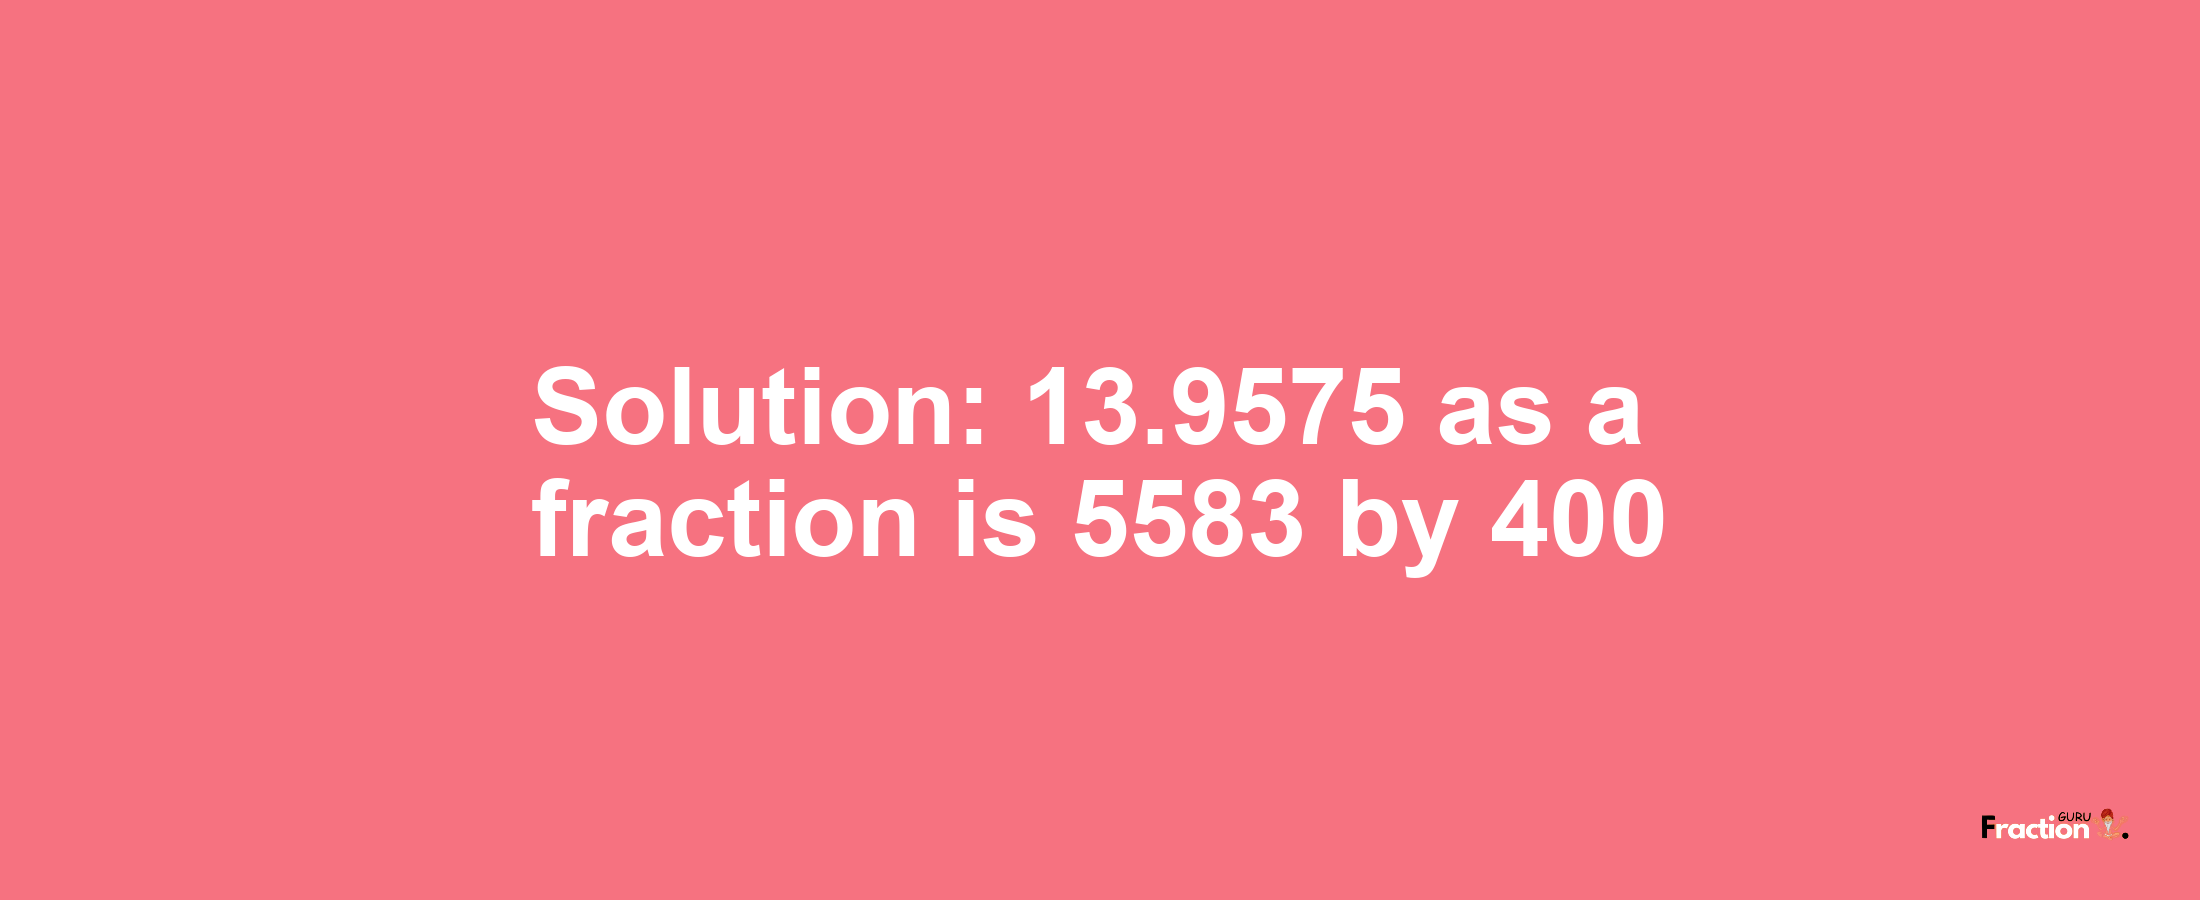 Solution:13.9575 as a fraction is 5583/400